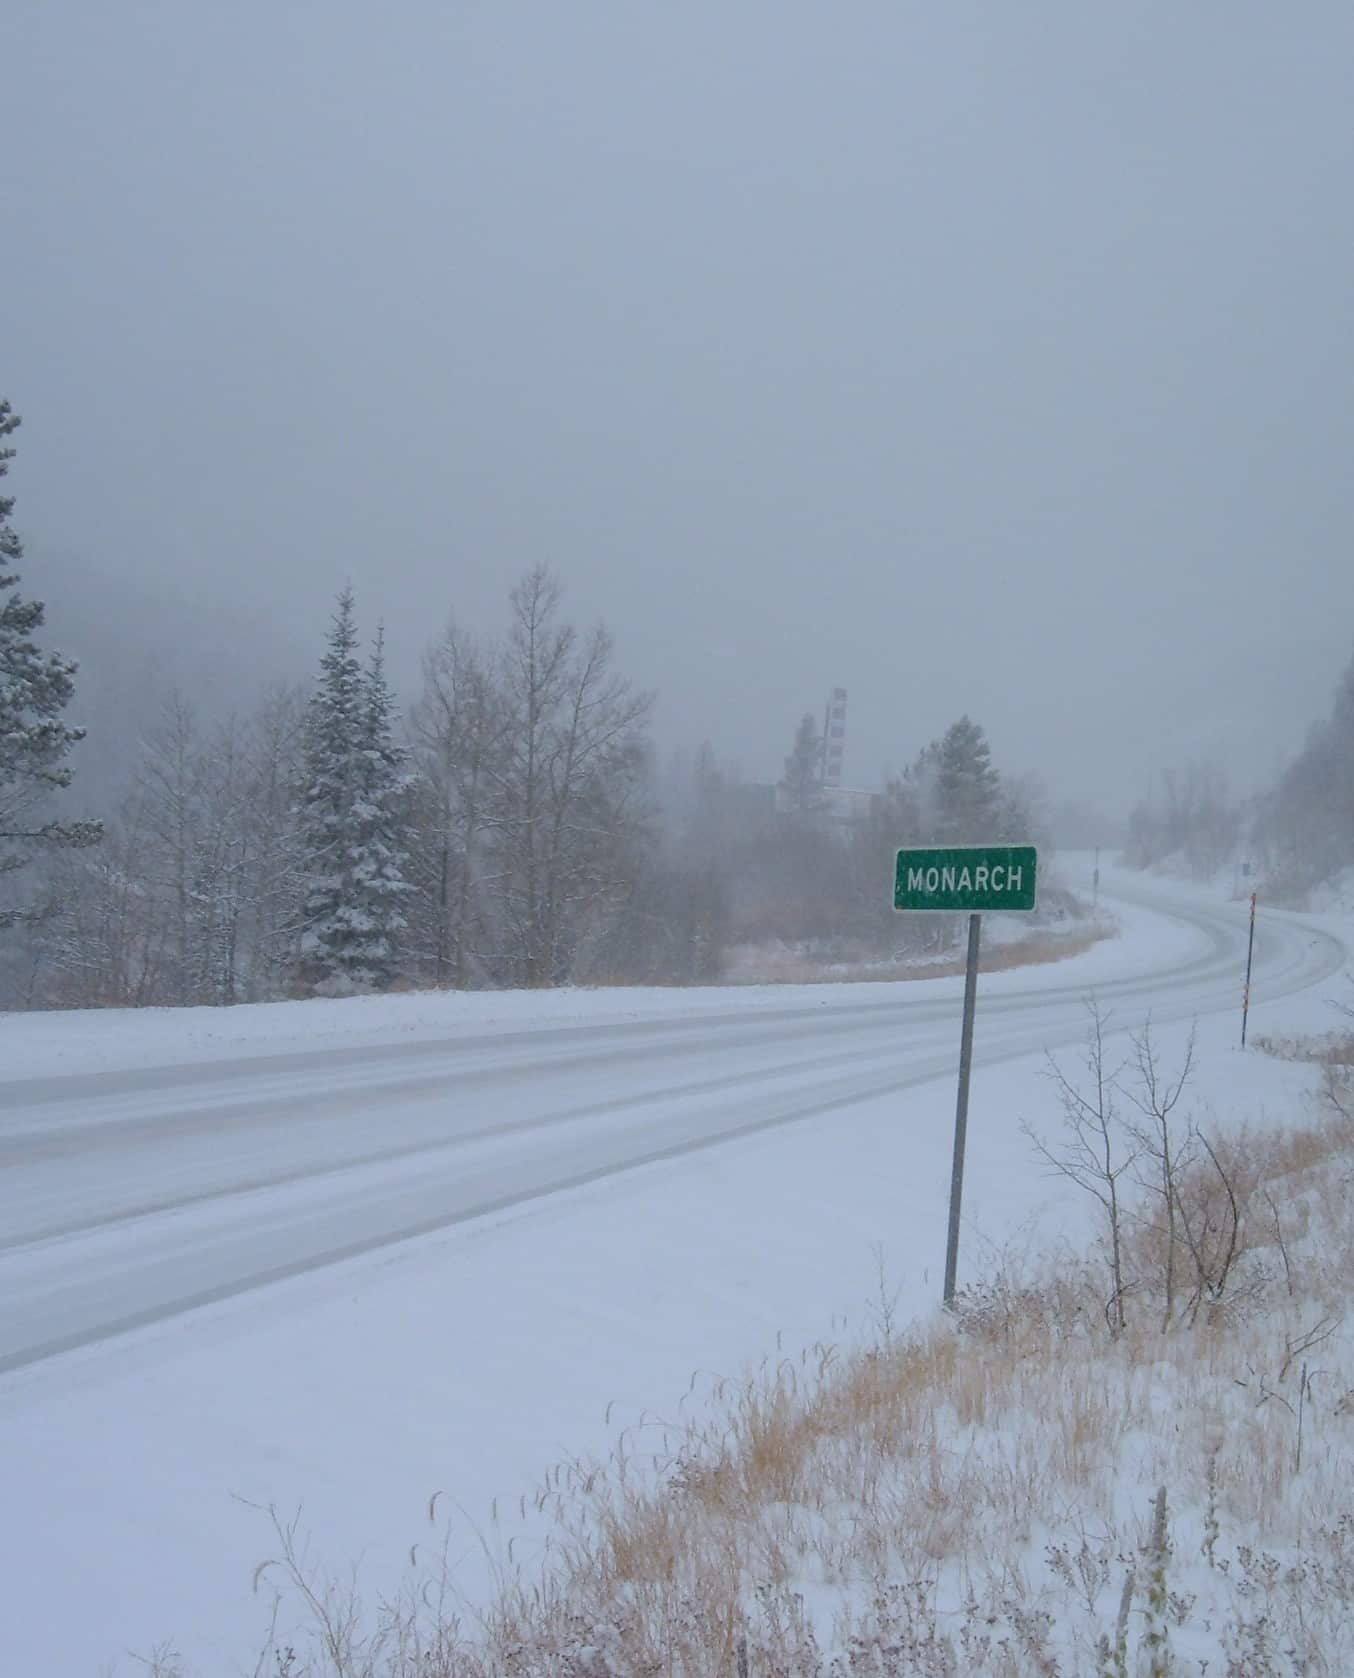 Monarch highway sign along a snowy mountain pass with fog all around.